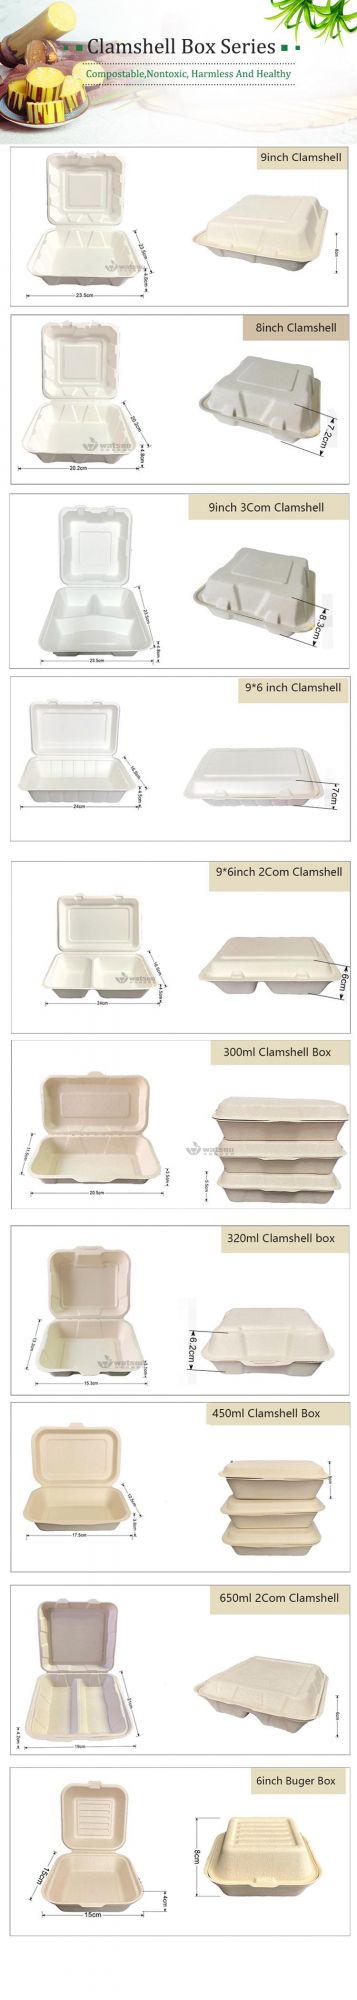 Eco Compostable 100% Biodegradable Envases Takeaway Disposable Packing Bento Lunch Bagasse Sugarcane Pizza Box